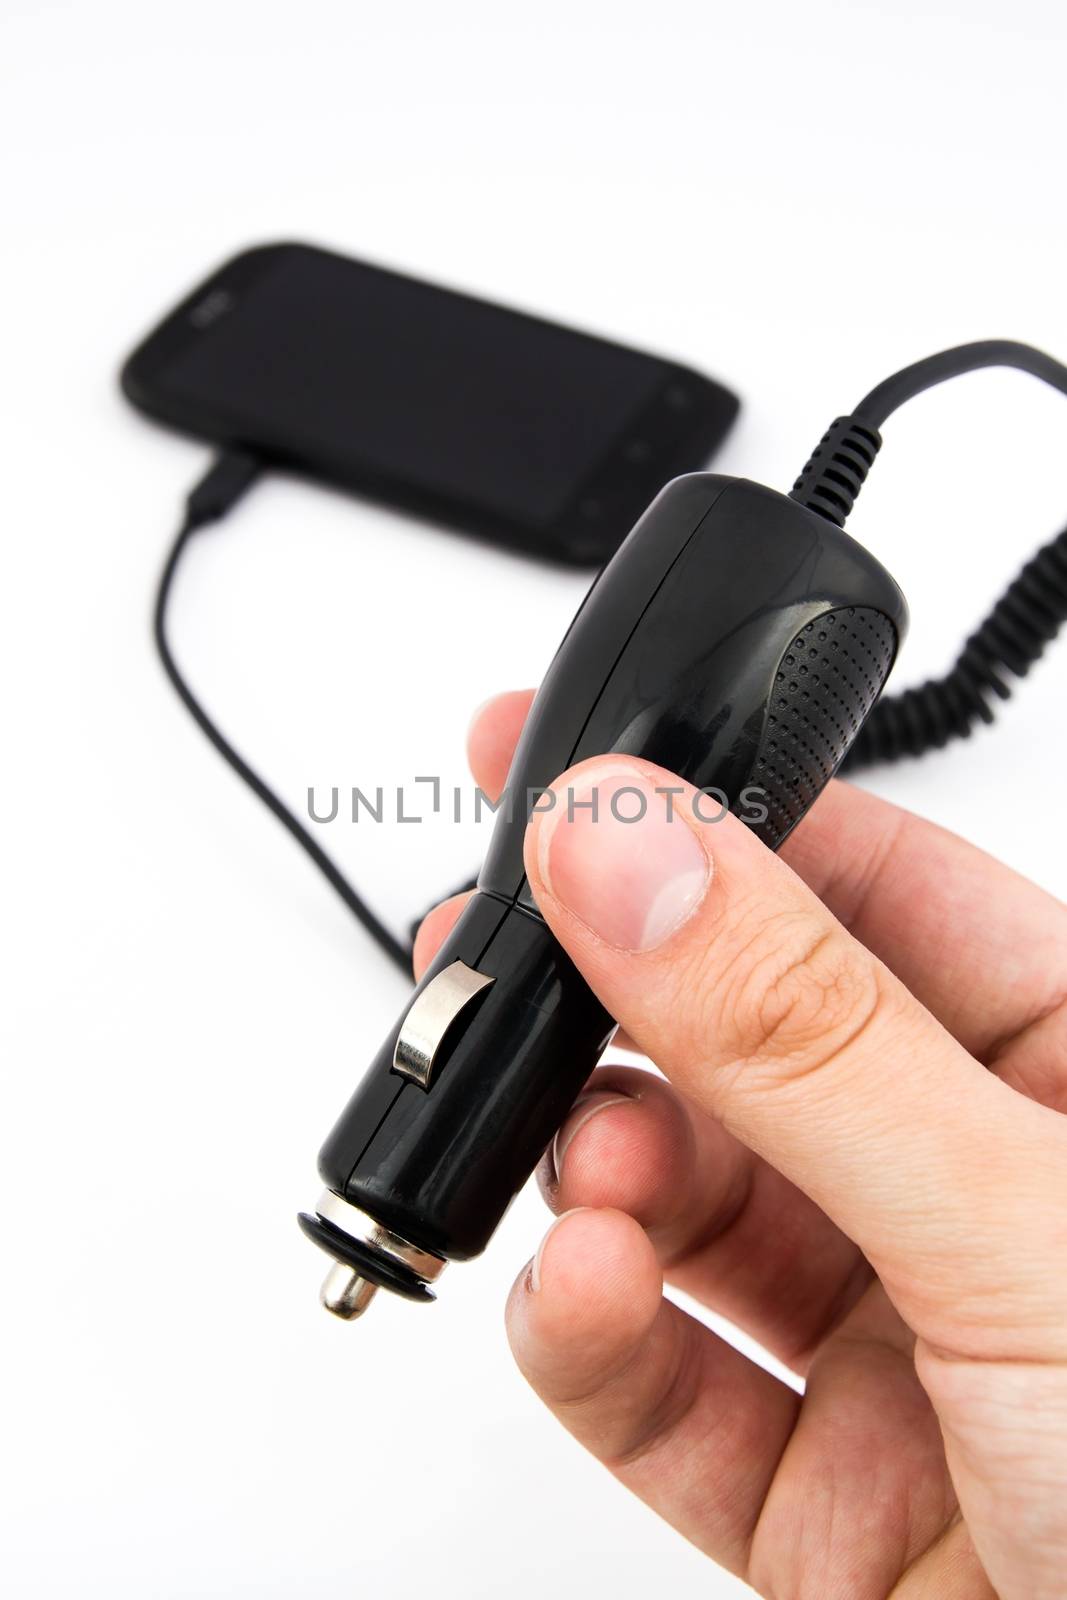 Hand holding car charger. Cell phone in background